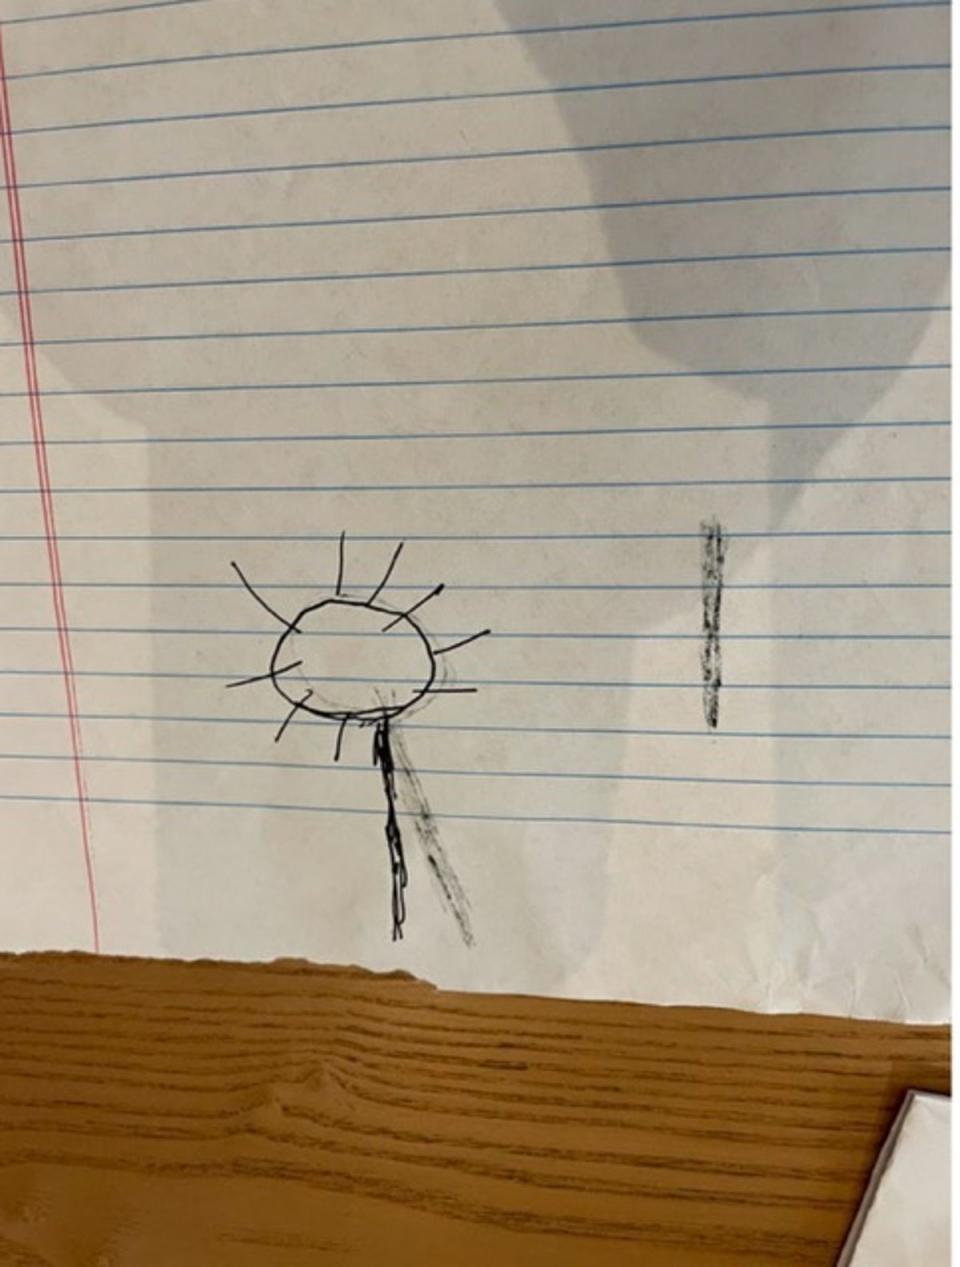 A second witness drawing depicts the type of weapon Nshimiye allegedly used to kill, with victims including a 14-year-old boy the Ohio engineer had also helped murder (Department of Homeland Security)